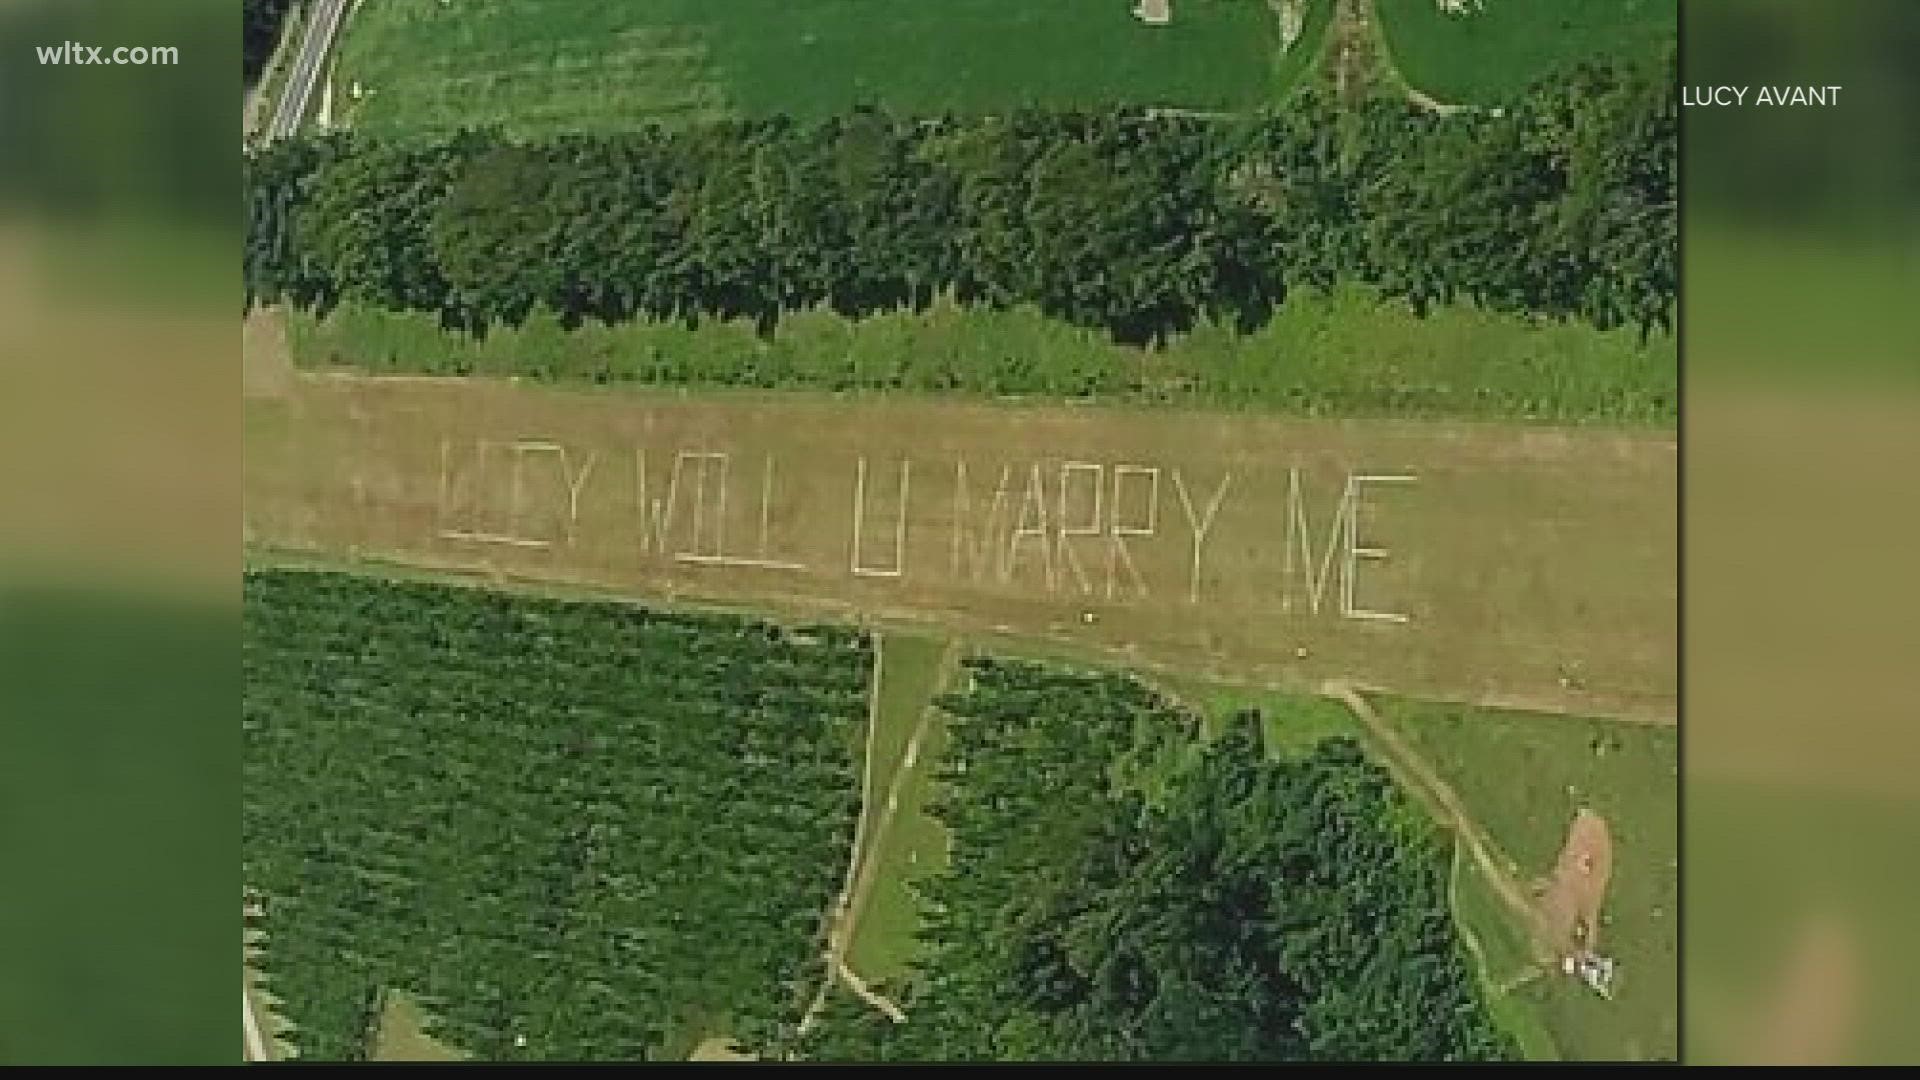 While flying in a plane with her boyfriend, Lucy Avant could see, "Lucy, will you marry me?" written on the ground below.